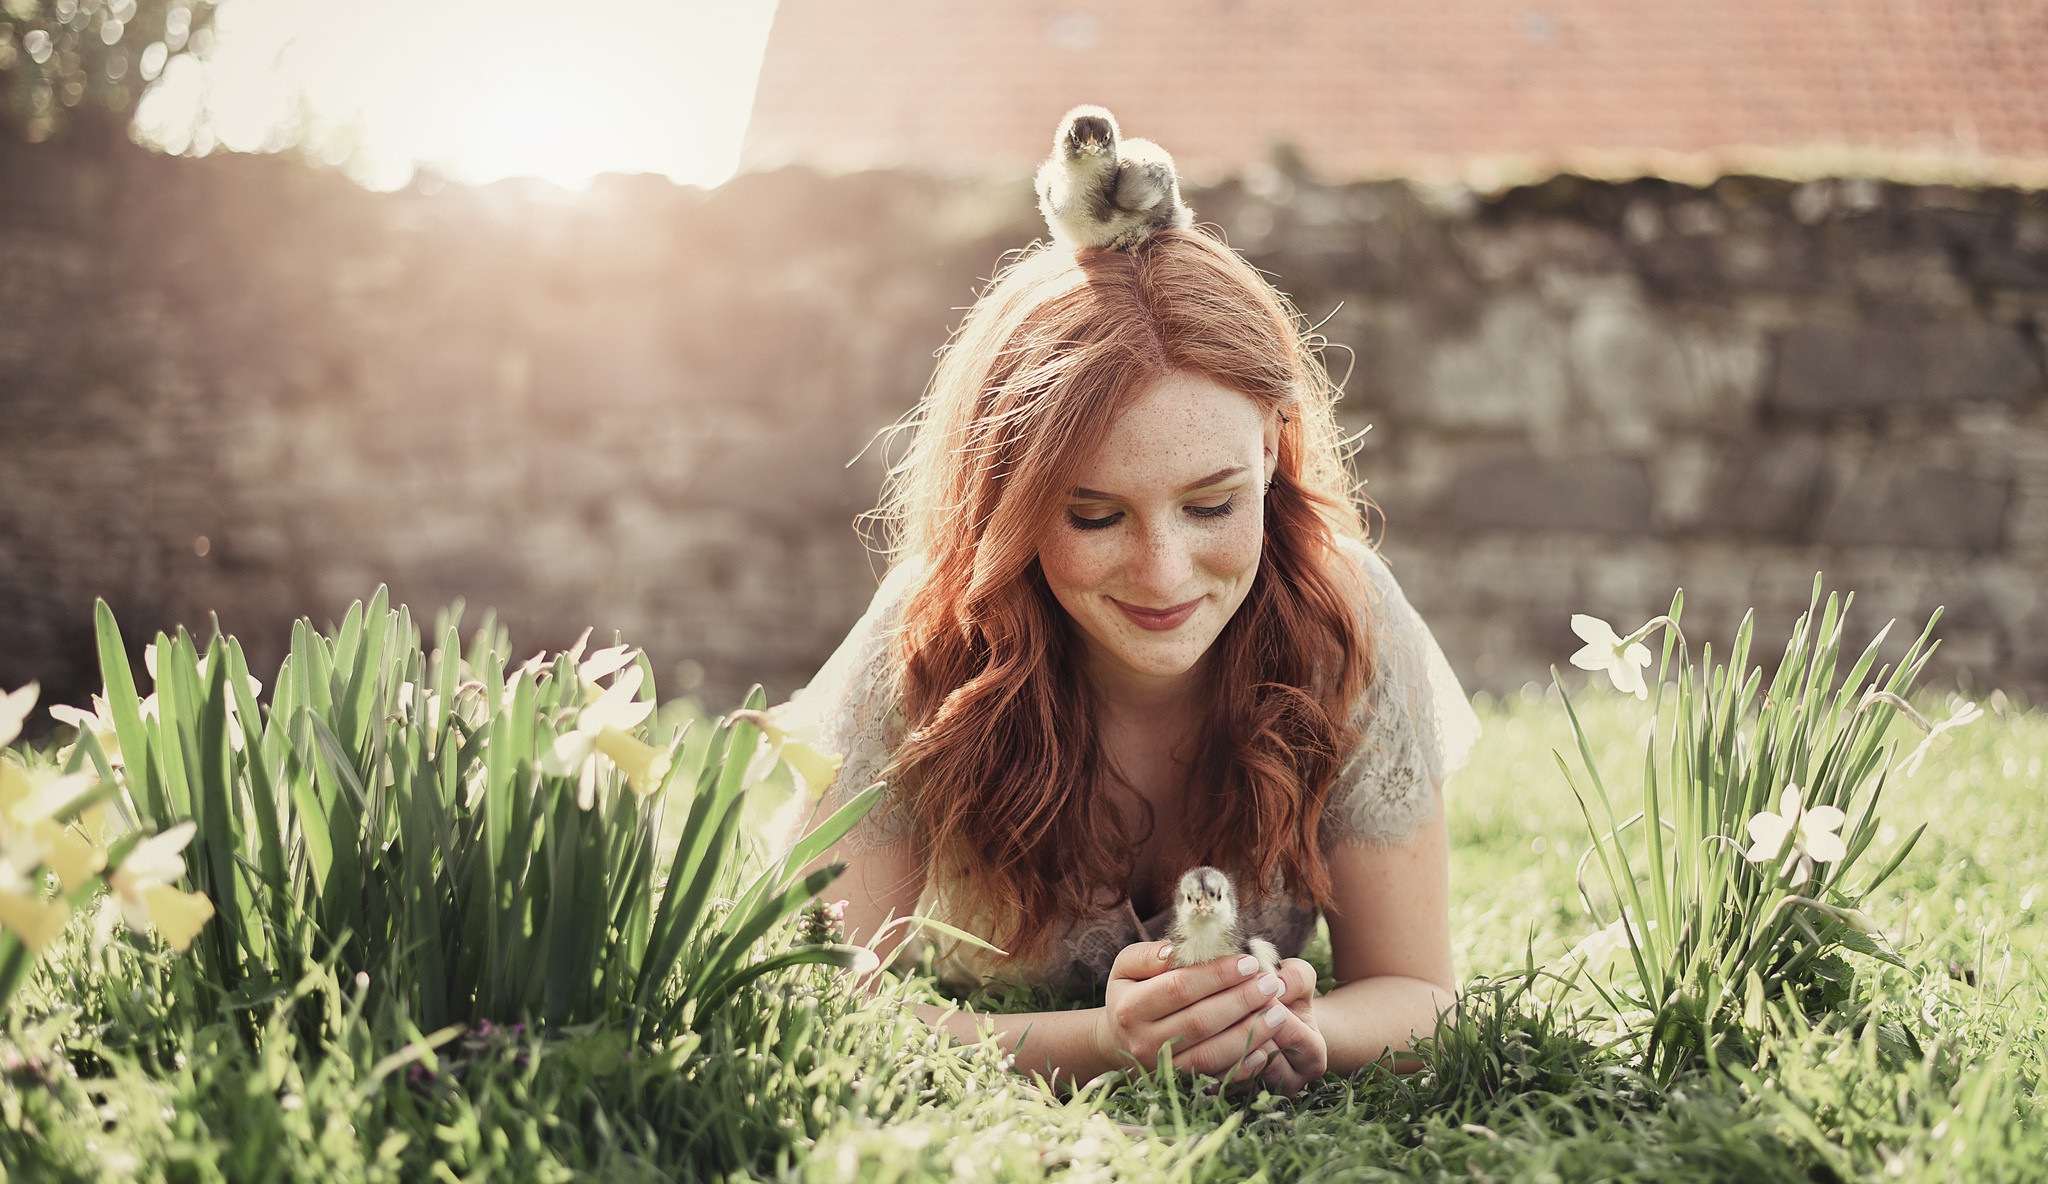 women, mood, baby animal, chick, freckles, grass, lying down, model, redhead, smile, sunny